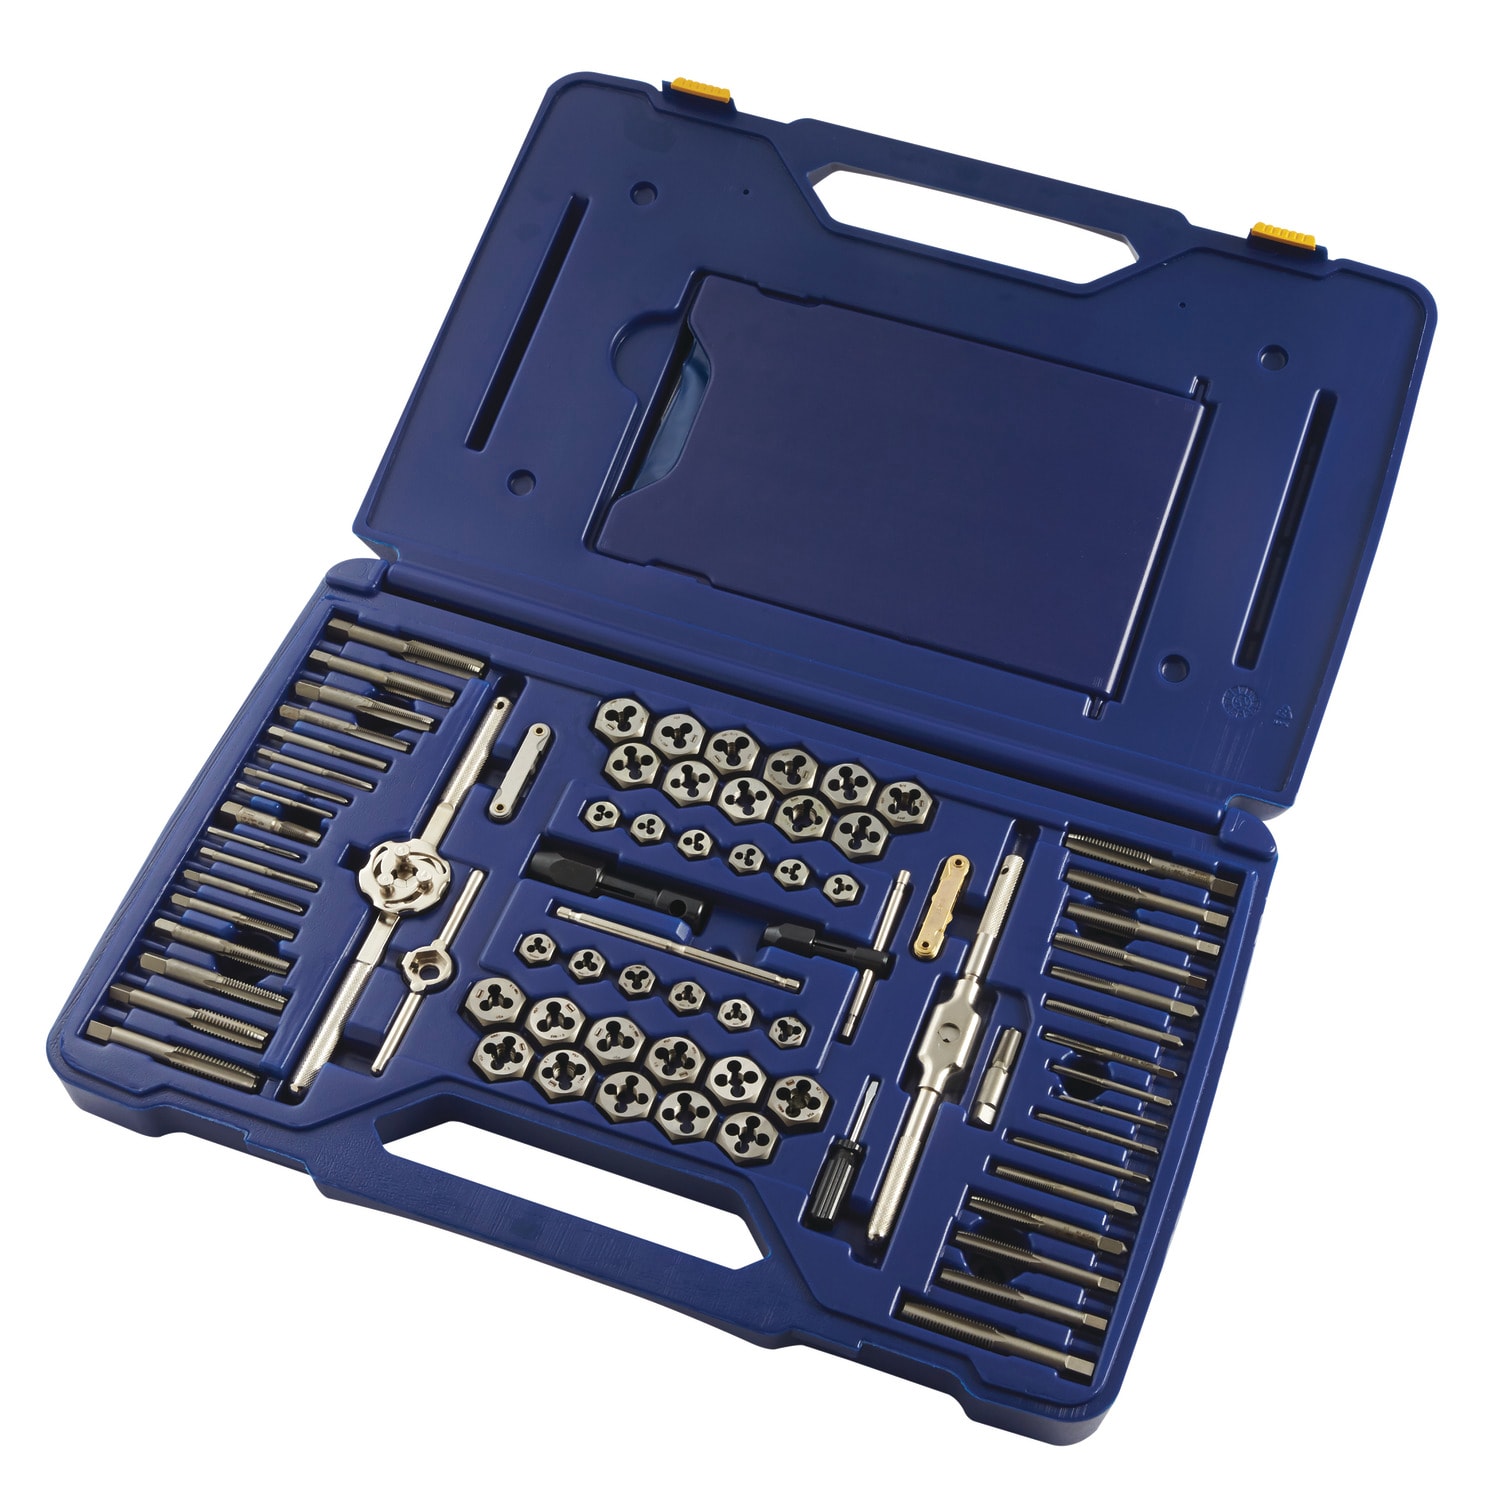 IRWIN 117-Piece Metric and Standard (SAE) Tap and Die Set in the 